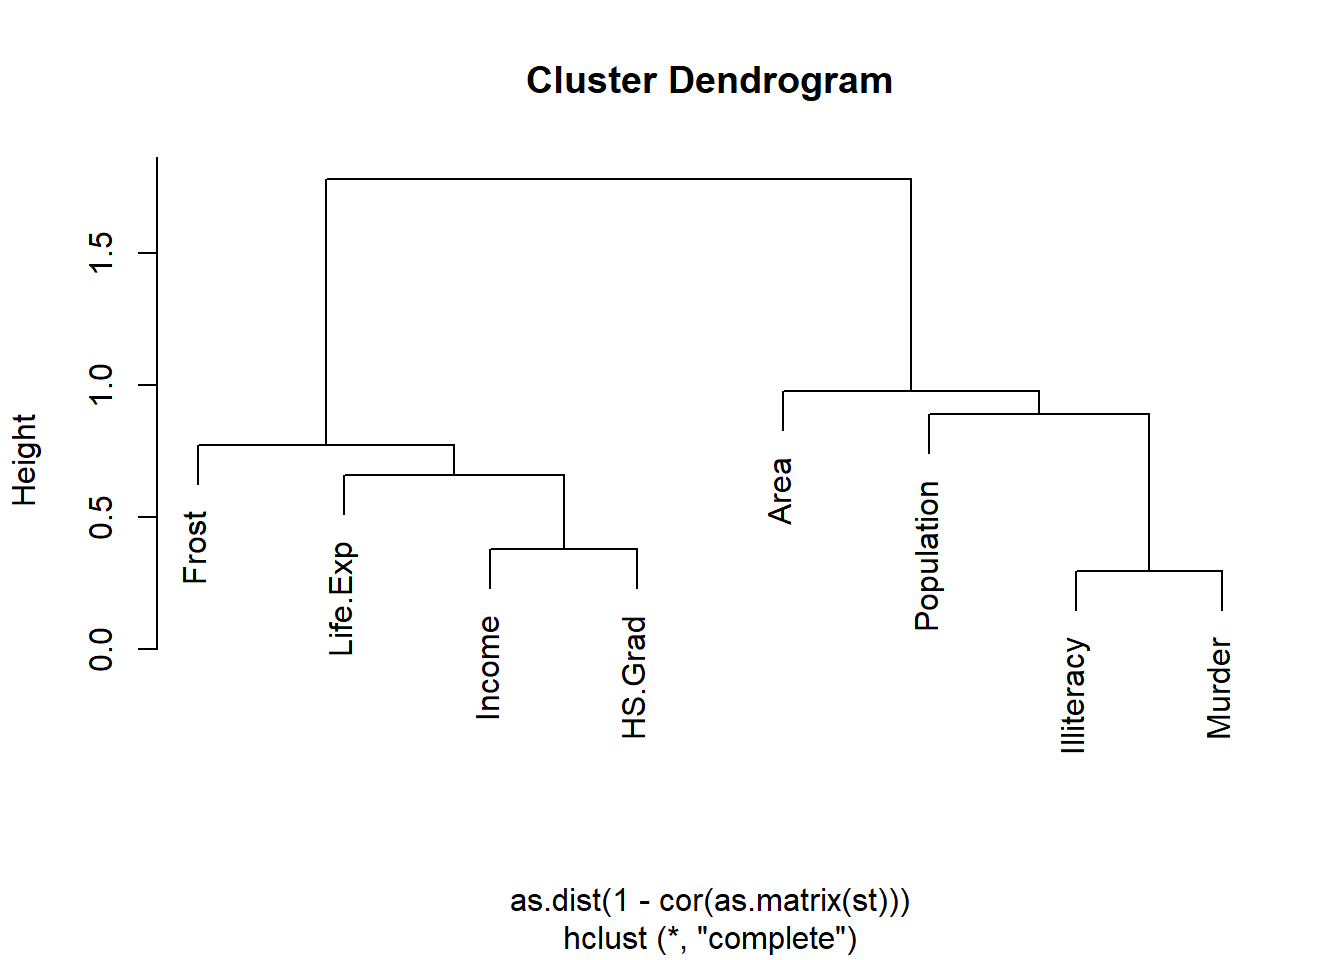 Cluster dendrogram for state numeric variables.